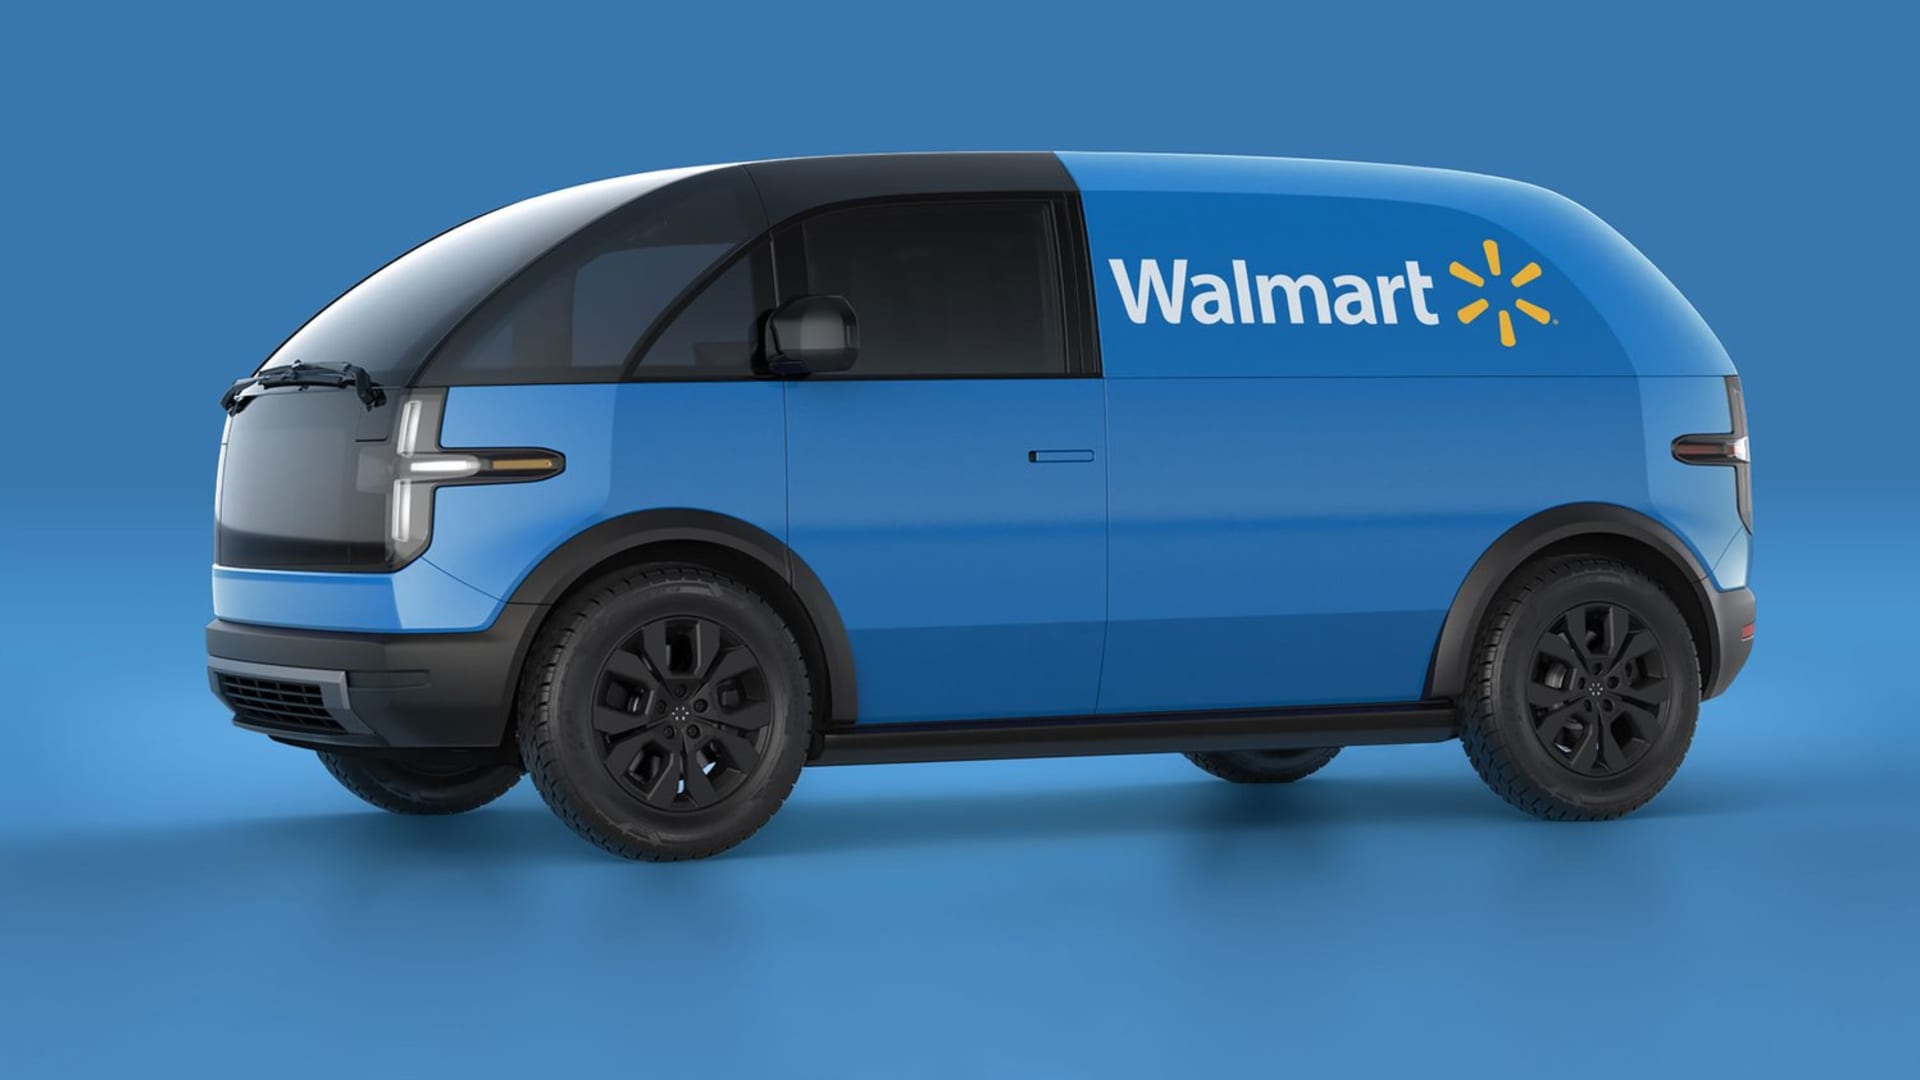 Shares of EV maker Canoo are surging after Walmart agrees to buy 4,500 electric delivery vans